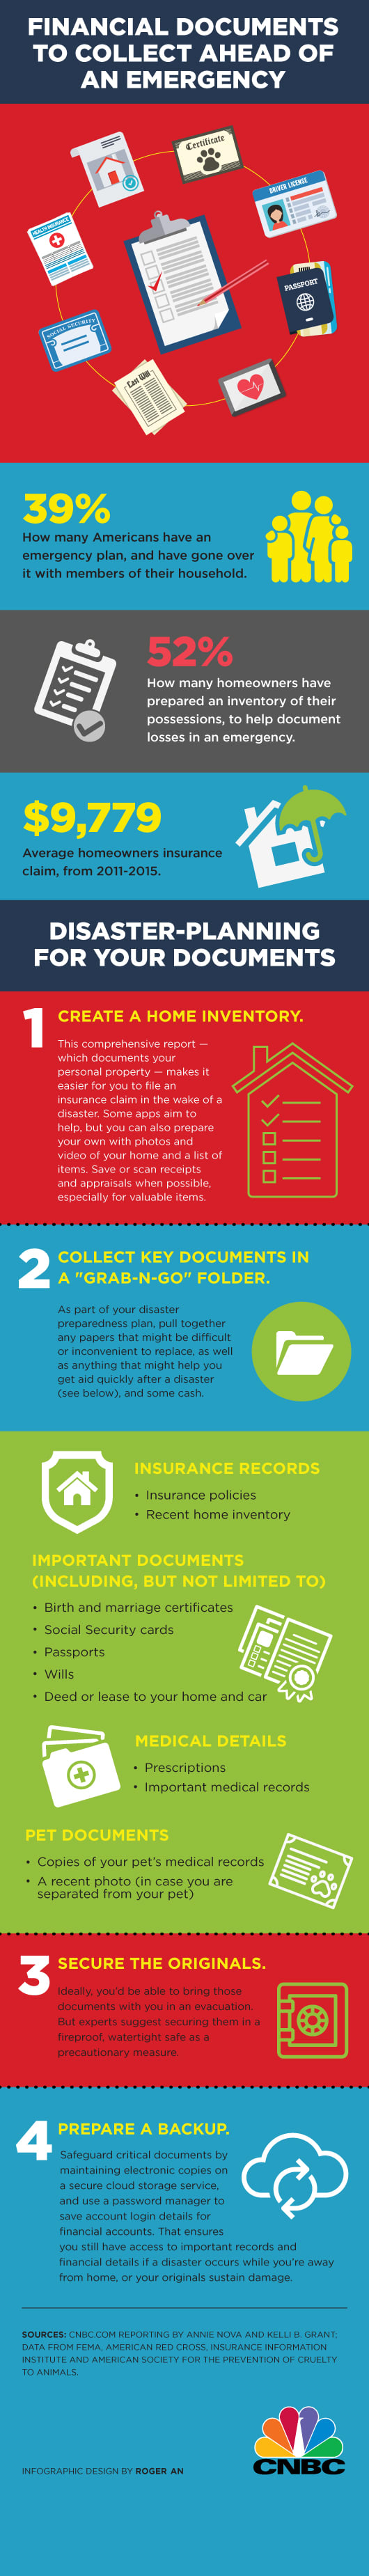 Emergency documents INFOGRAPHIC